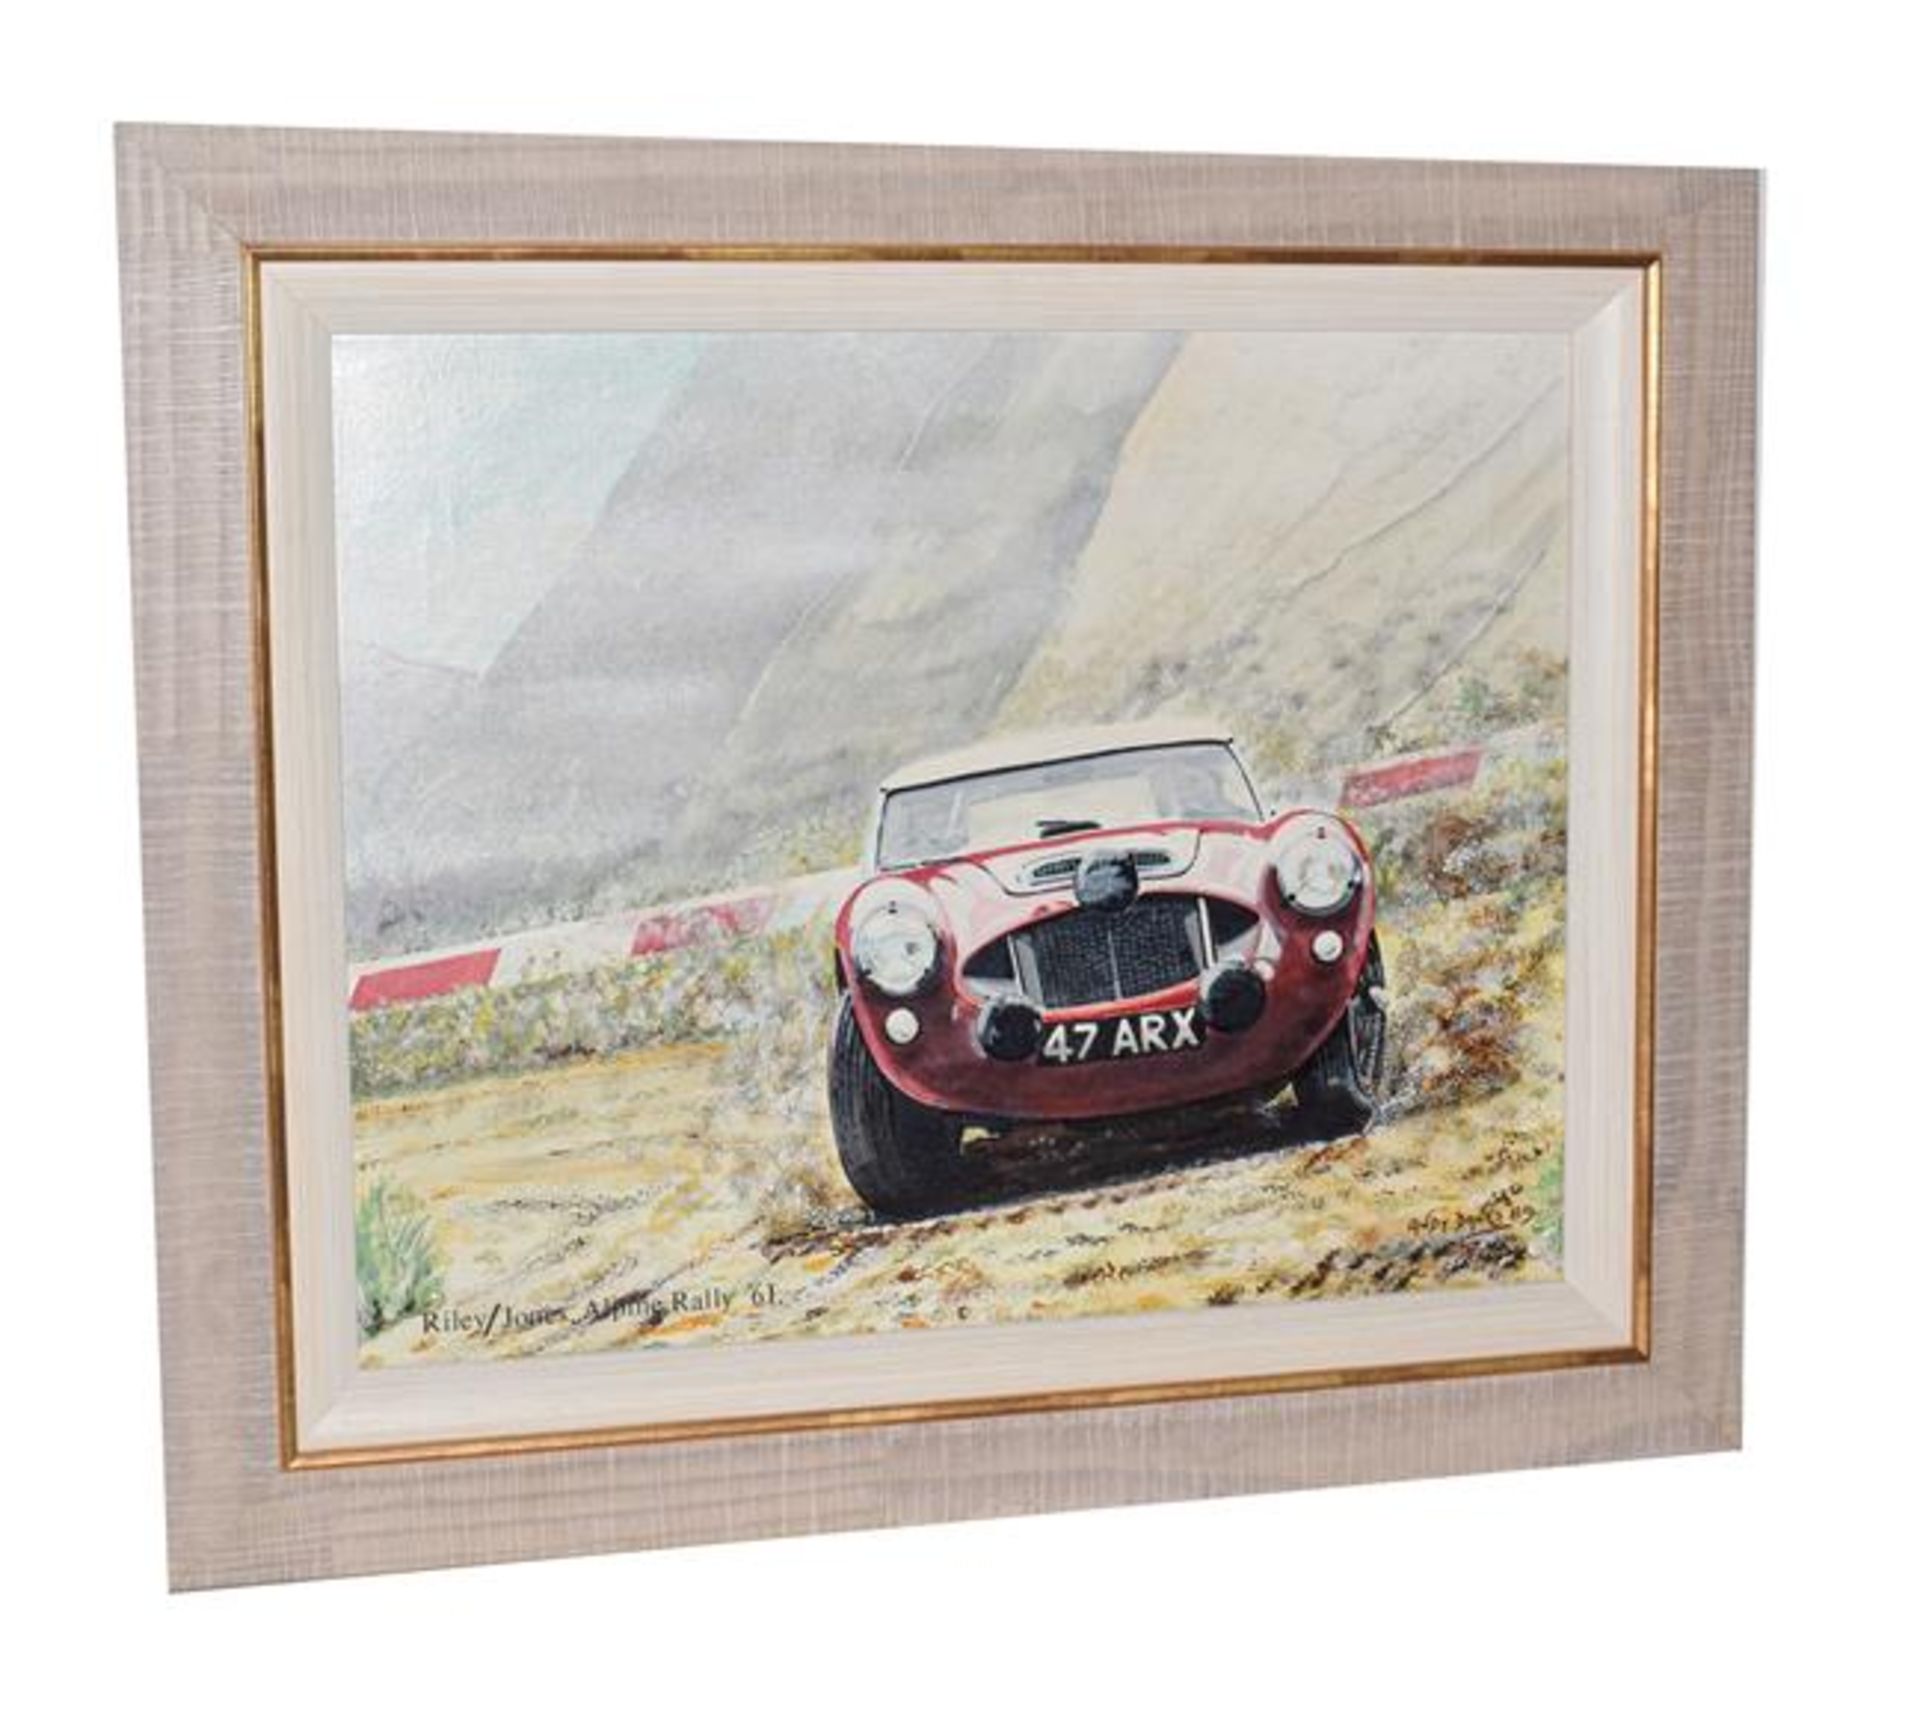 Andy Danks (Contemporary) Rally/Jones Alpine Rally 1961 car registration 47 ARX Signed and dated